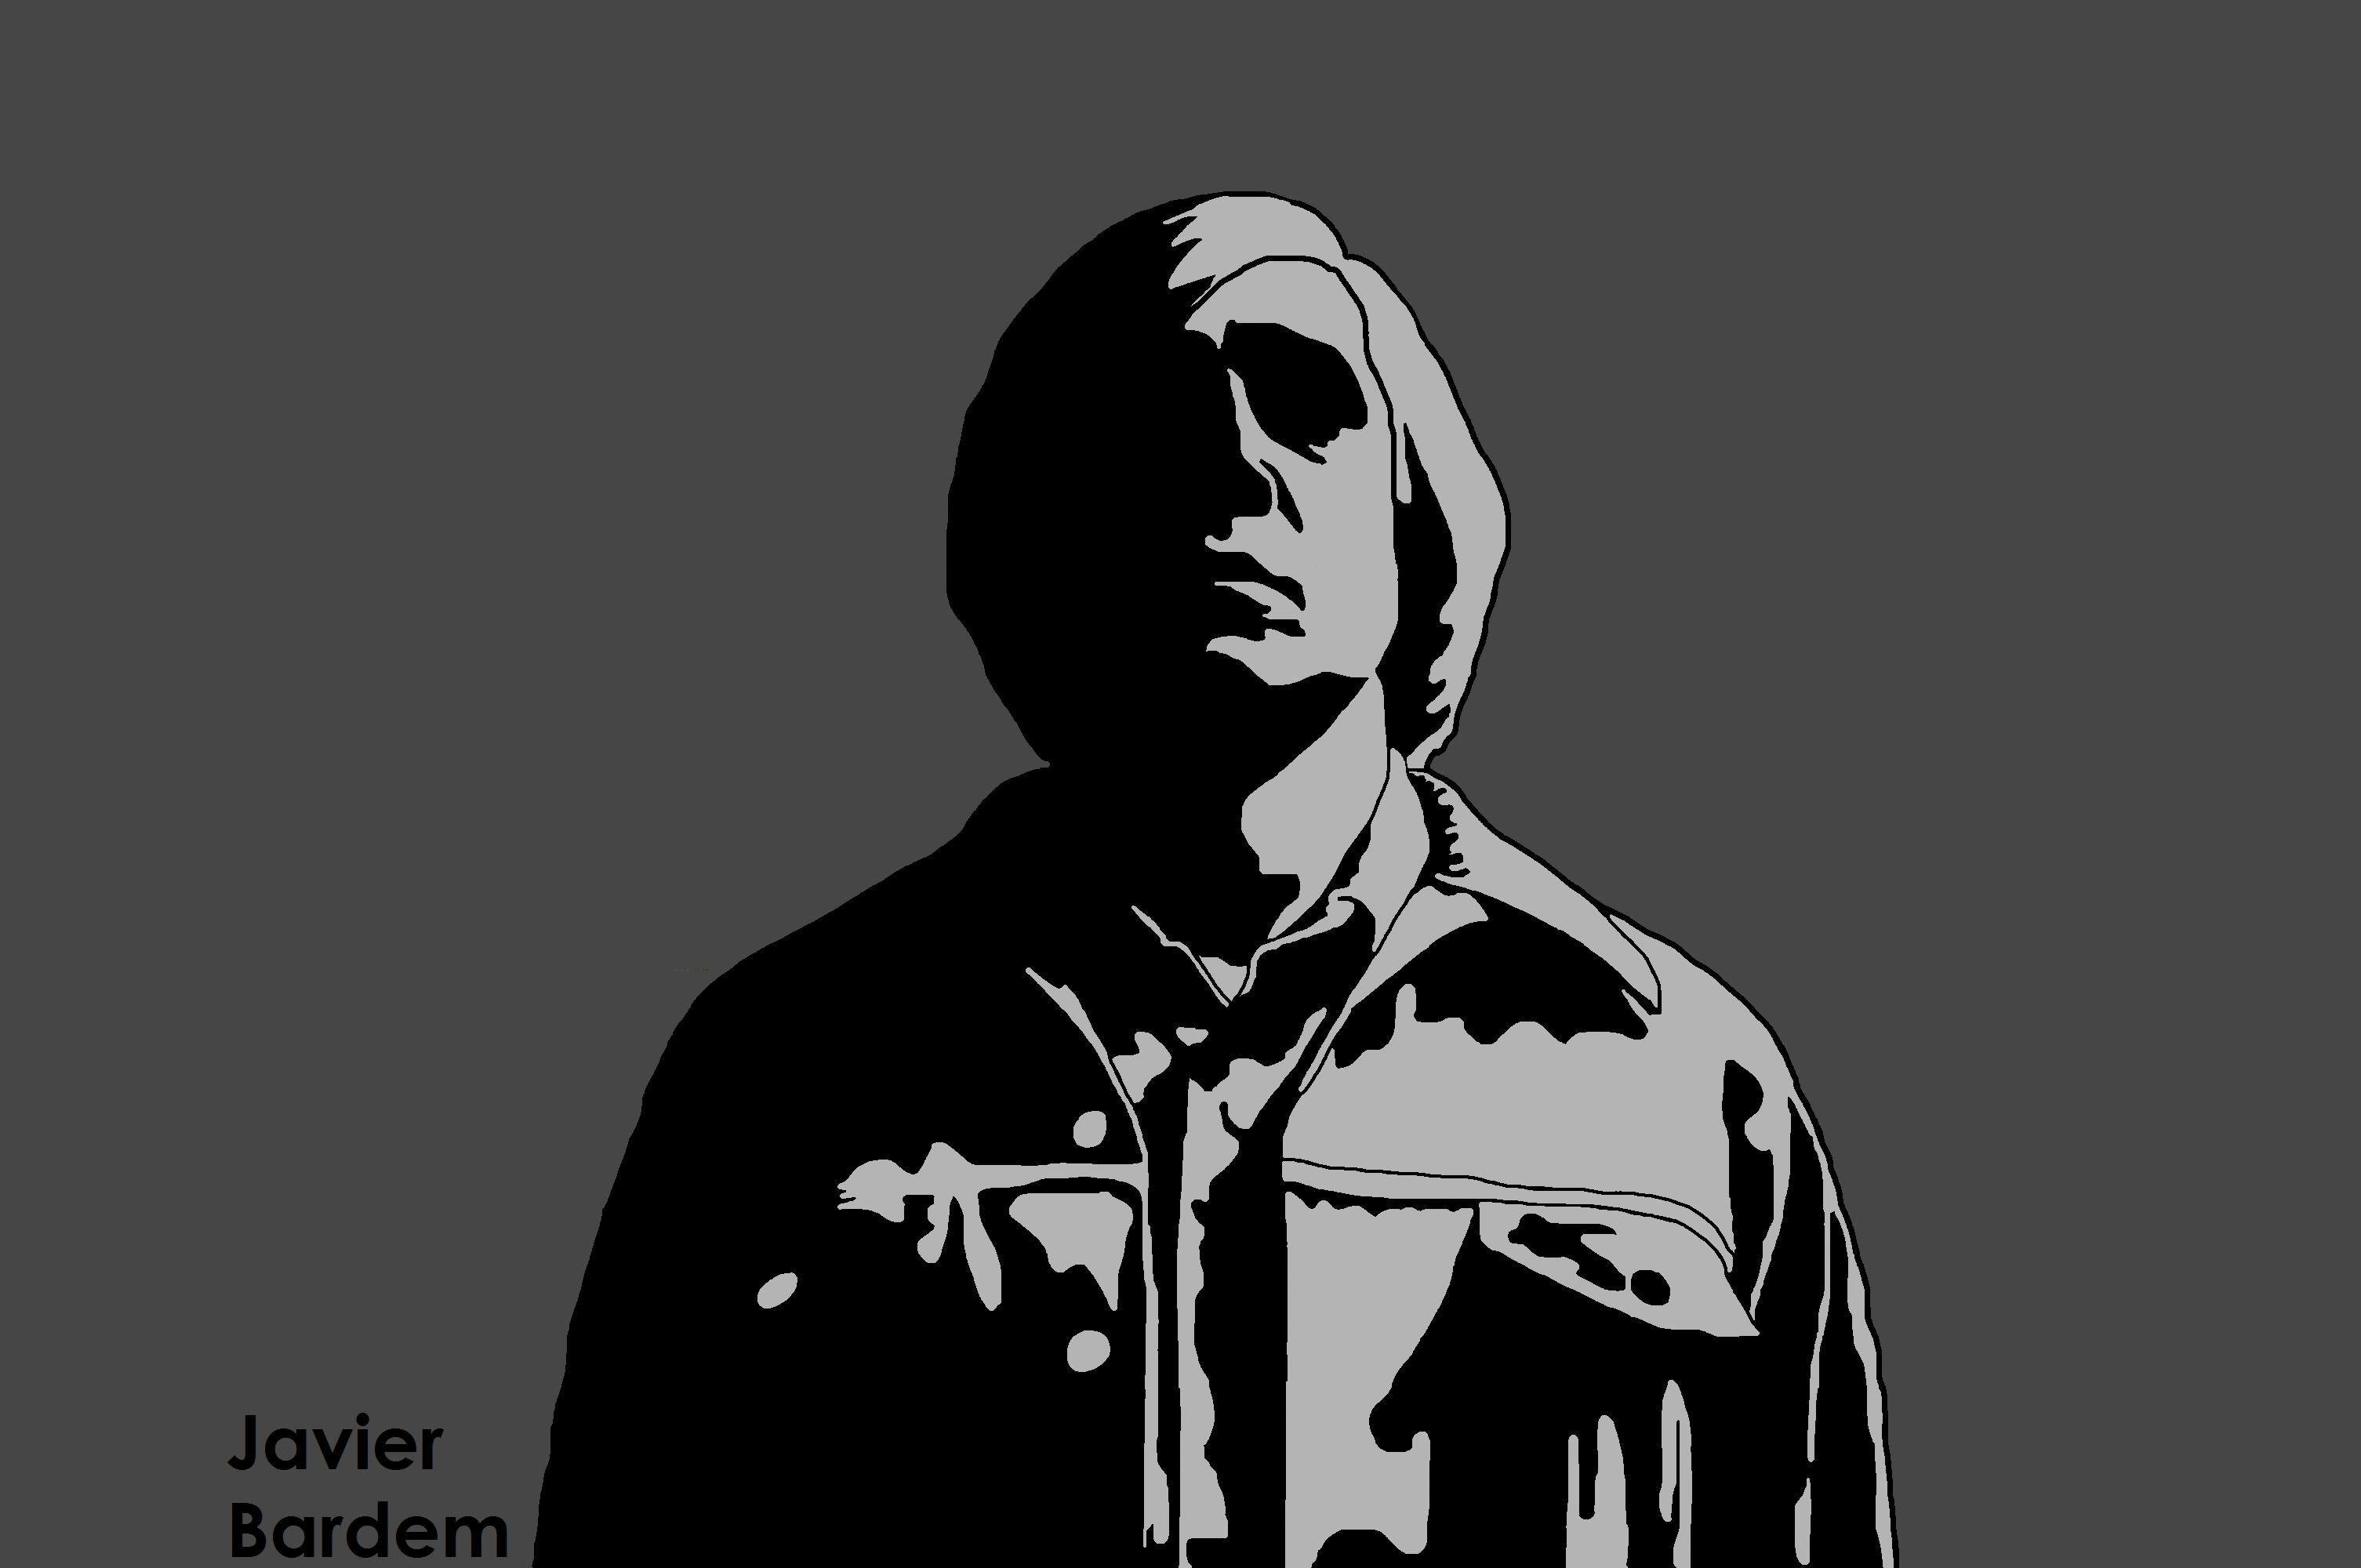 no country for old men javier bardem 3011x2000 wallpaper High